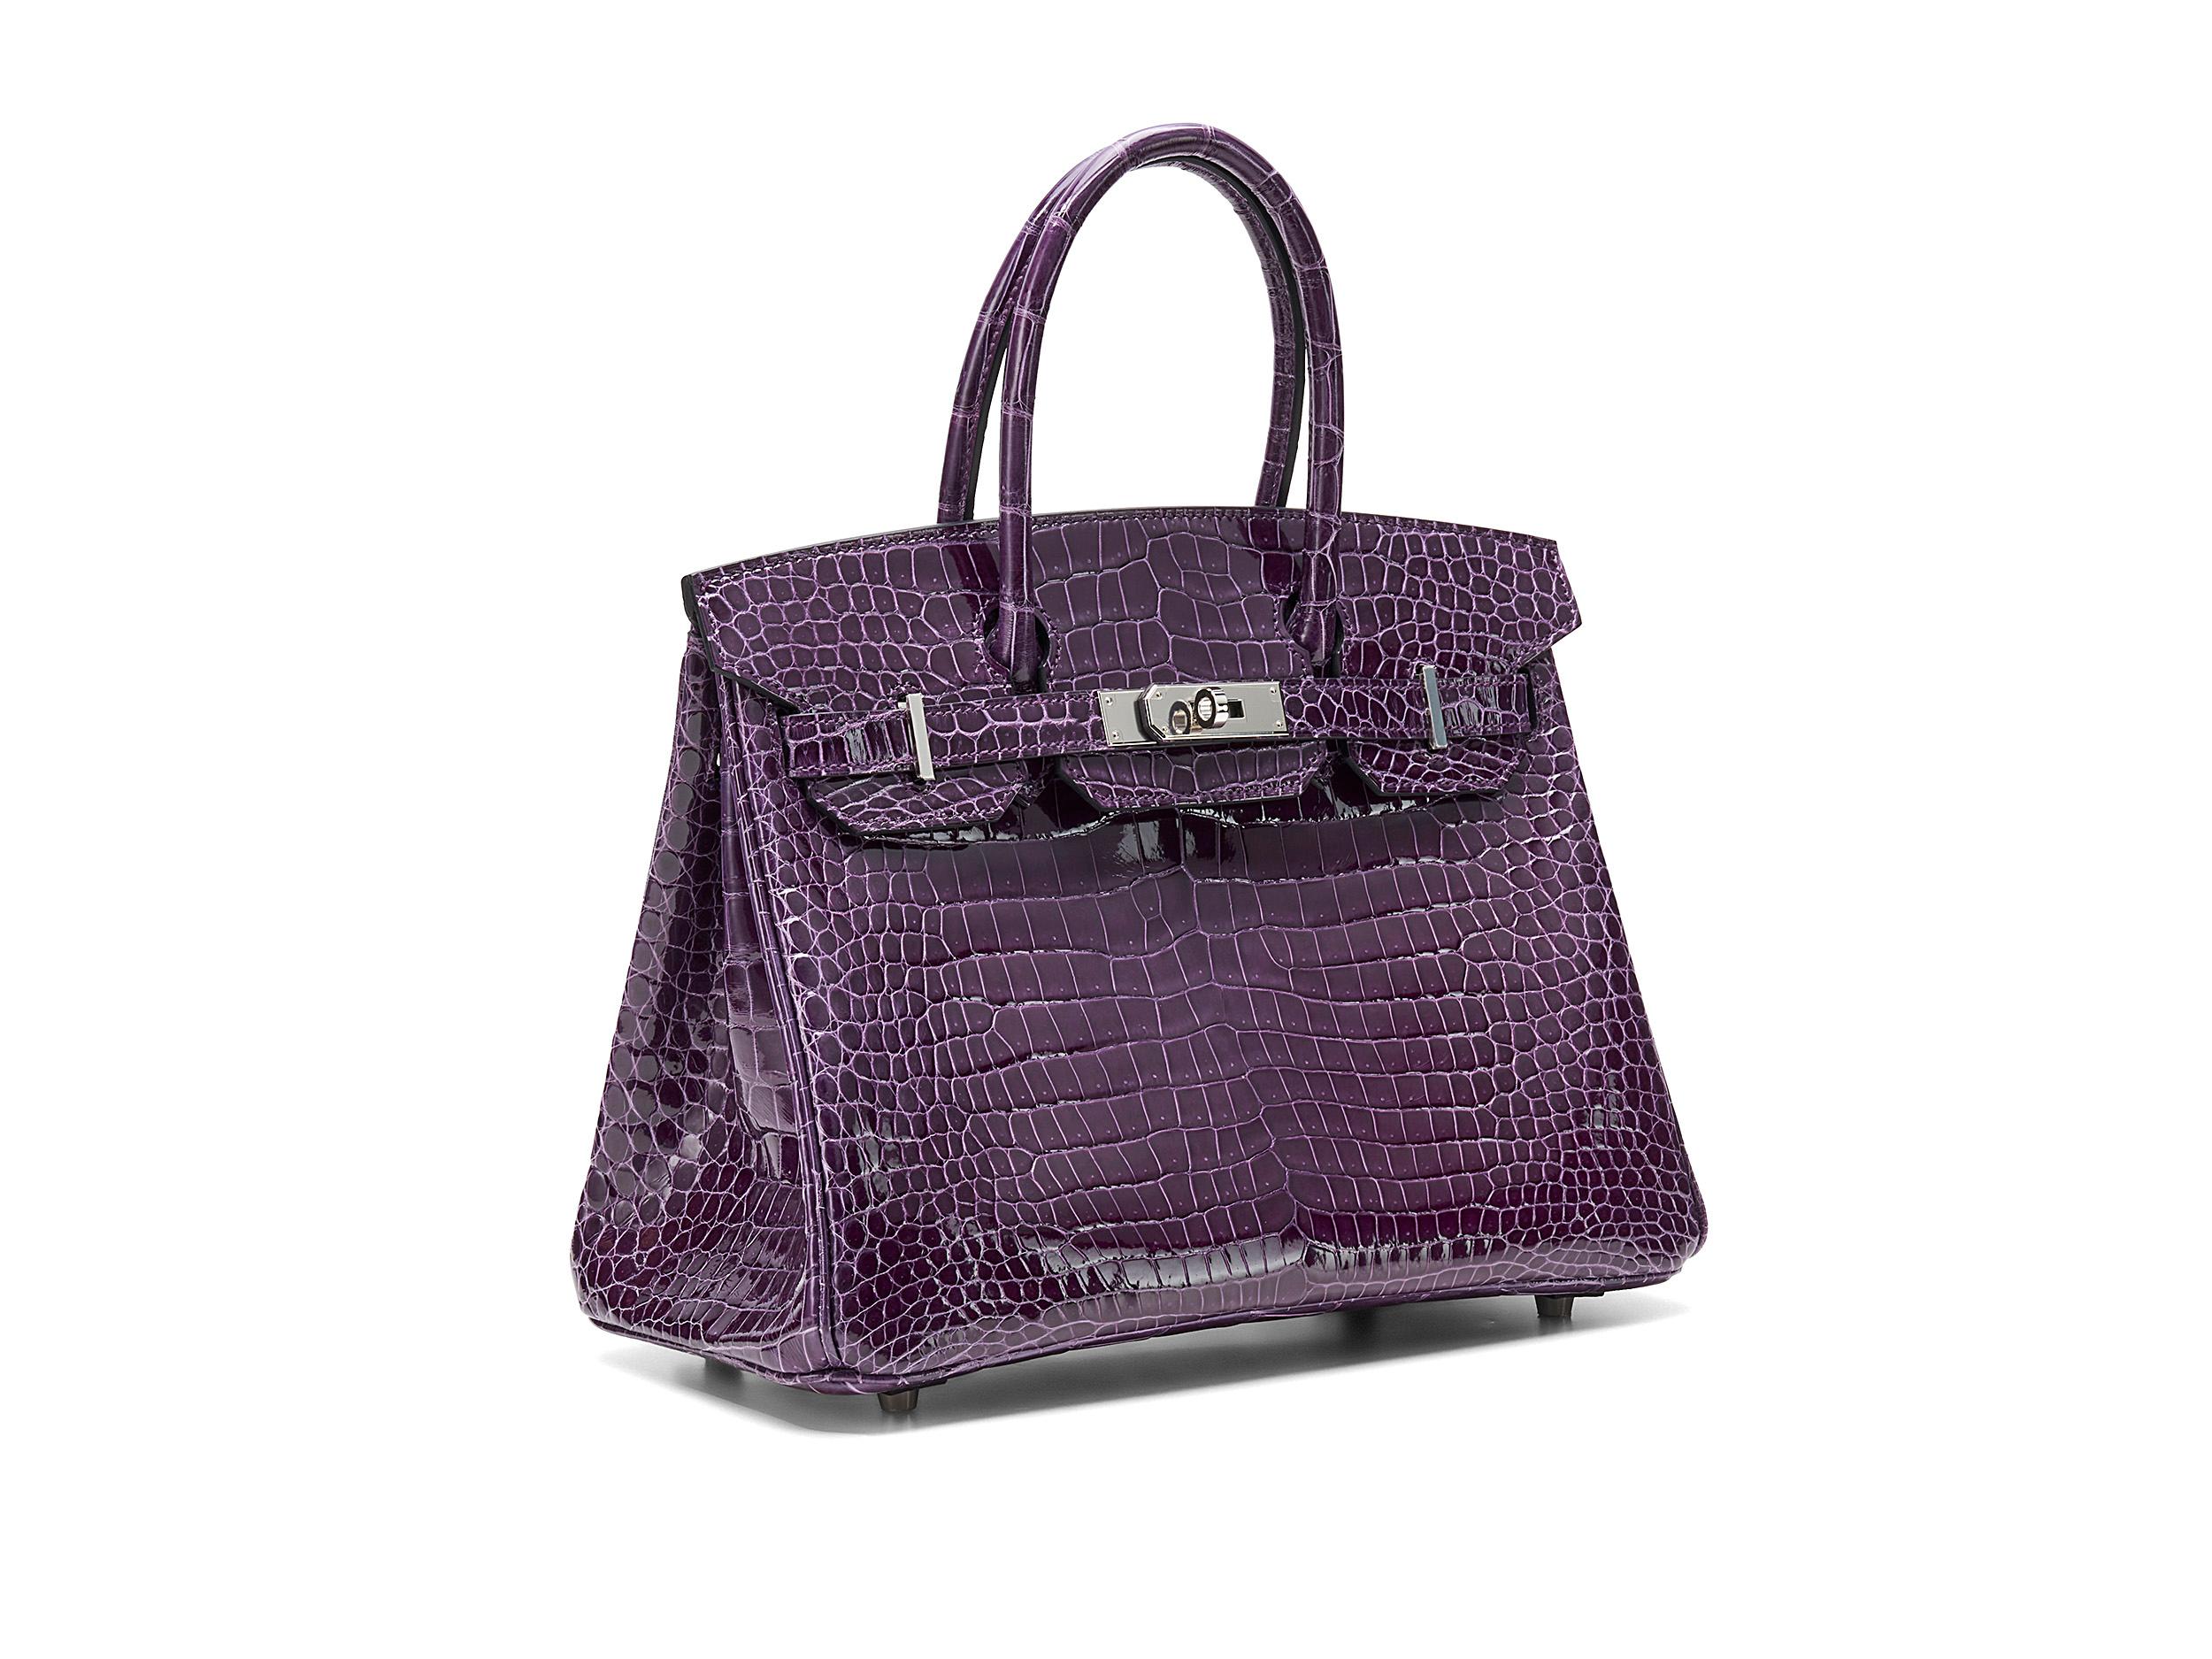 Hermès Birkin 30 in cassis and shiny crocodile porosus leather with palladium hardware. The bag is unworn and comes as full set including the original receipt and Cites. Stamp Y (2020) 